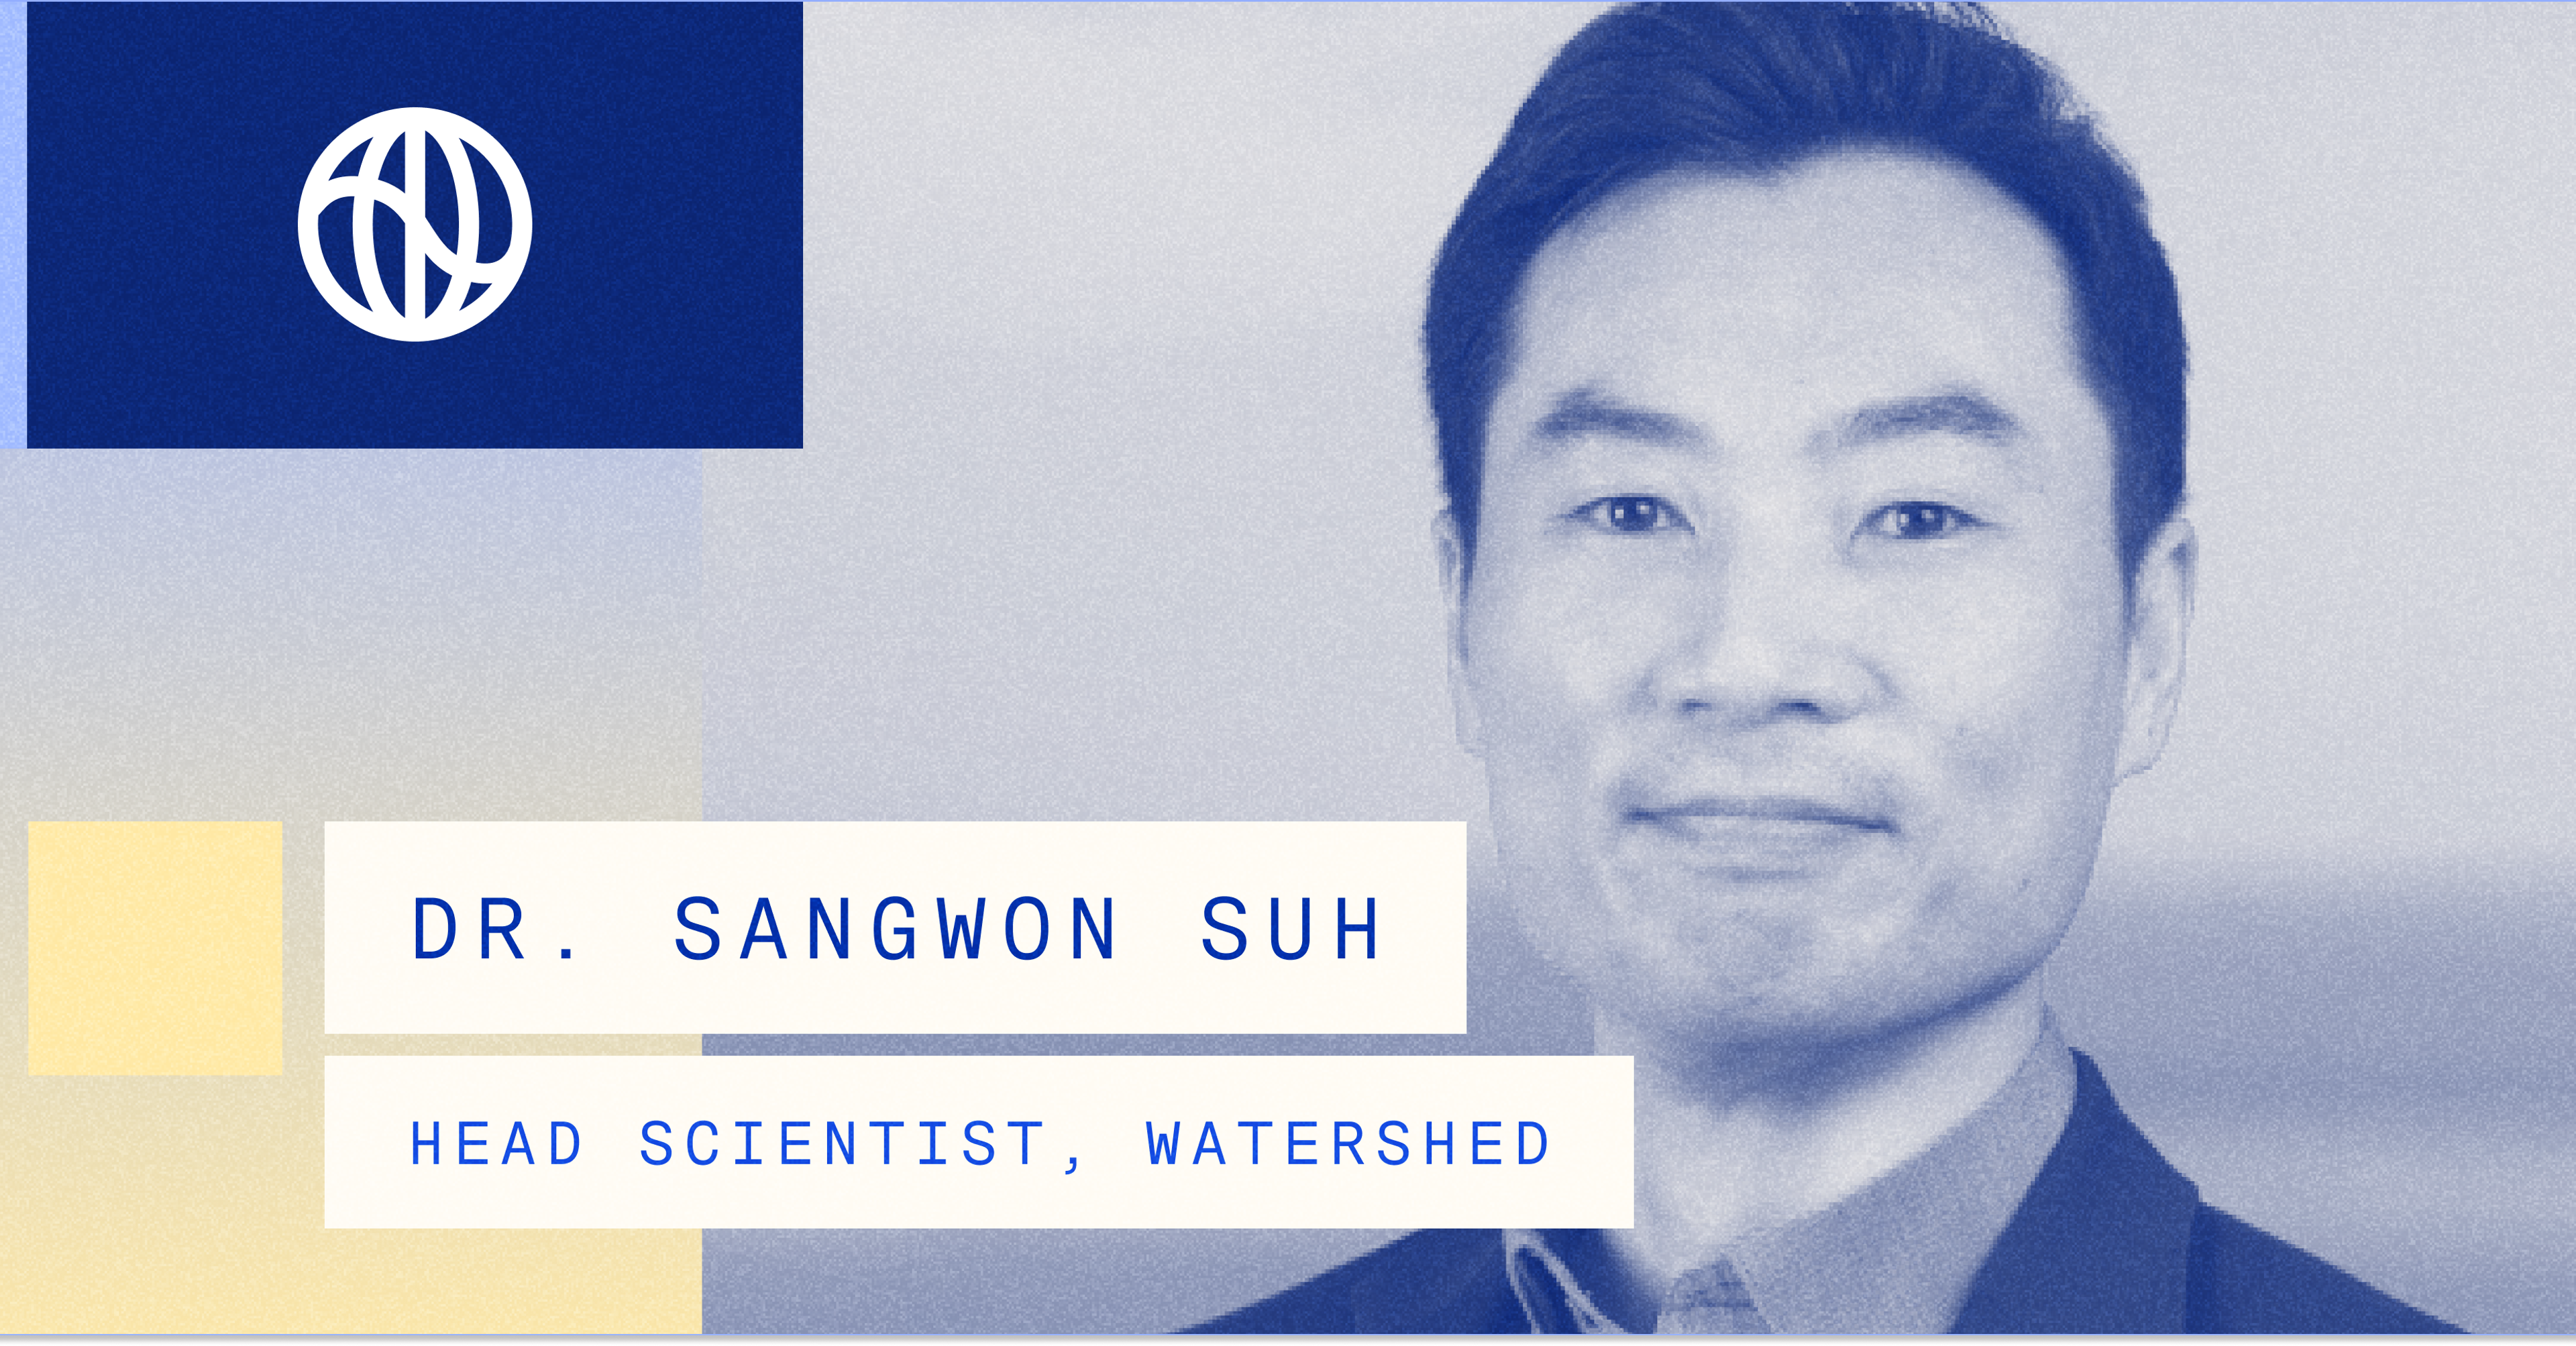  Portrait of Sangwon Suh with nametag and Watershed logo